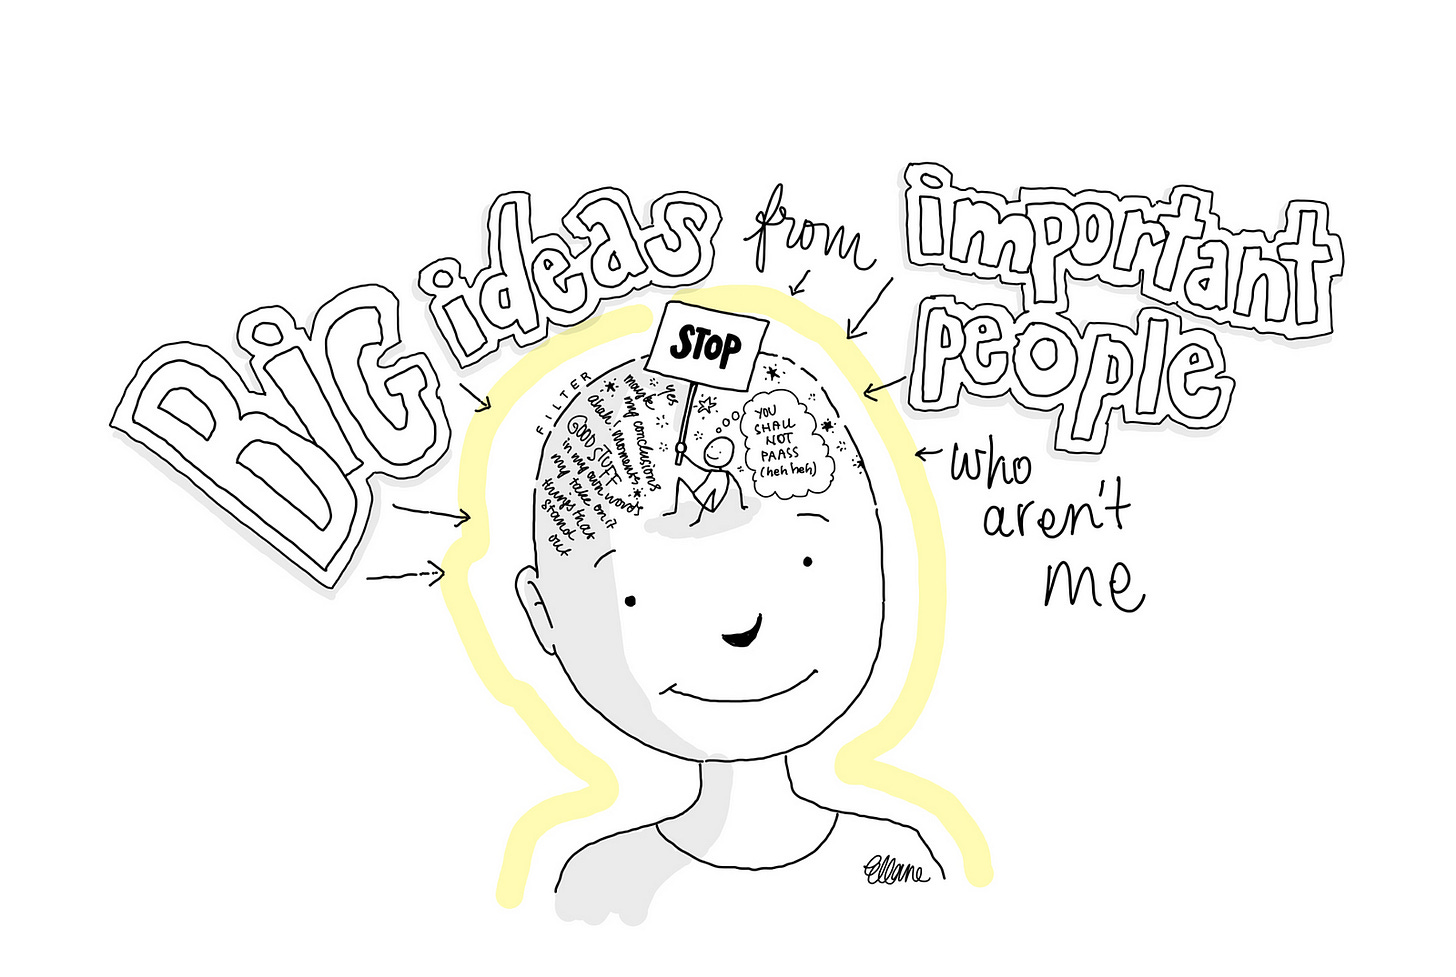 Line drawing of the head and shoulders of a person with text in and around their head and a yellow halo surrounding them. The text outside of them reads “Big ideas from important people who aren’t me”. There is a tiny figure inside their head holding up a sign that reads “STOP”. There’s a thought bubble coming from the tiny person that says “You shall not pass (heh heh)”. Other words inside the head include “Filter, ideas that stand out, good stuff, ahah moments, my conclusions.”